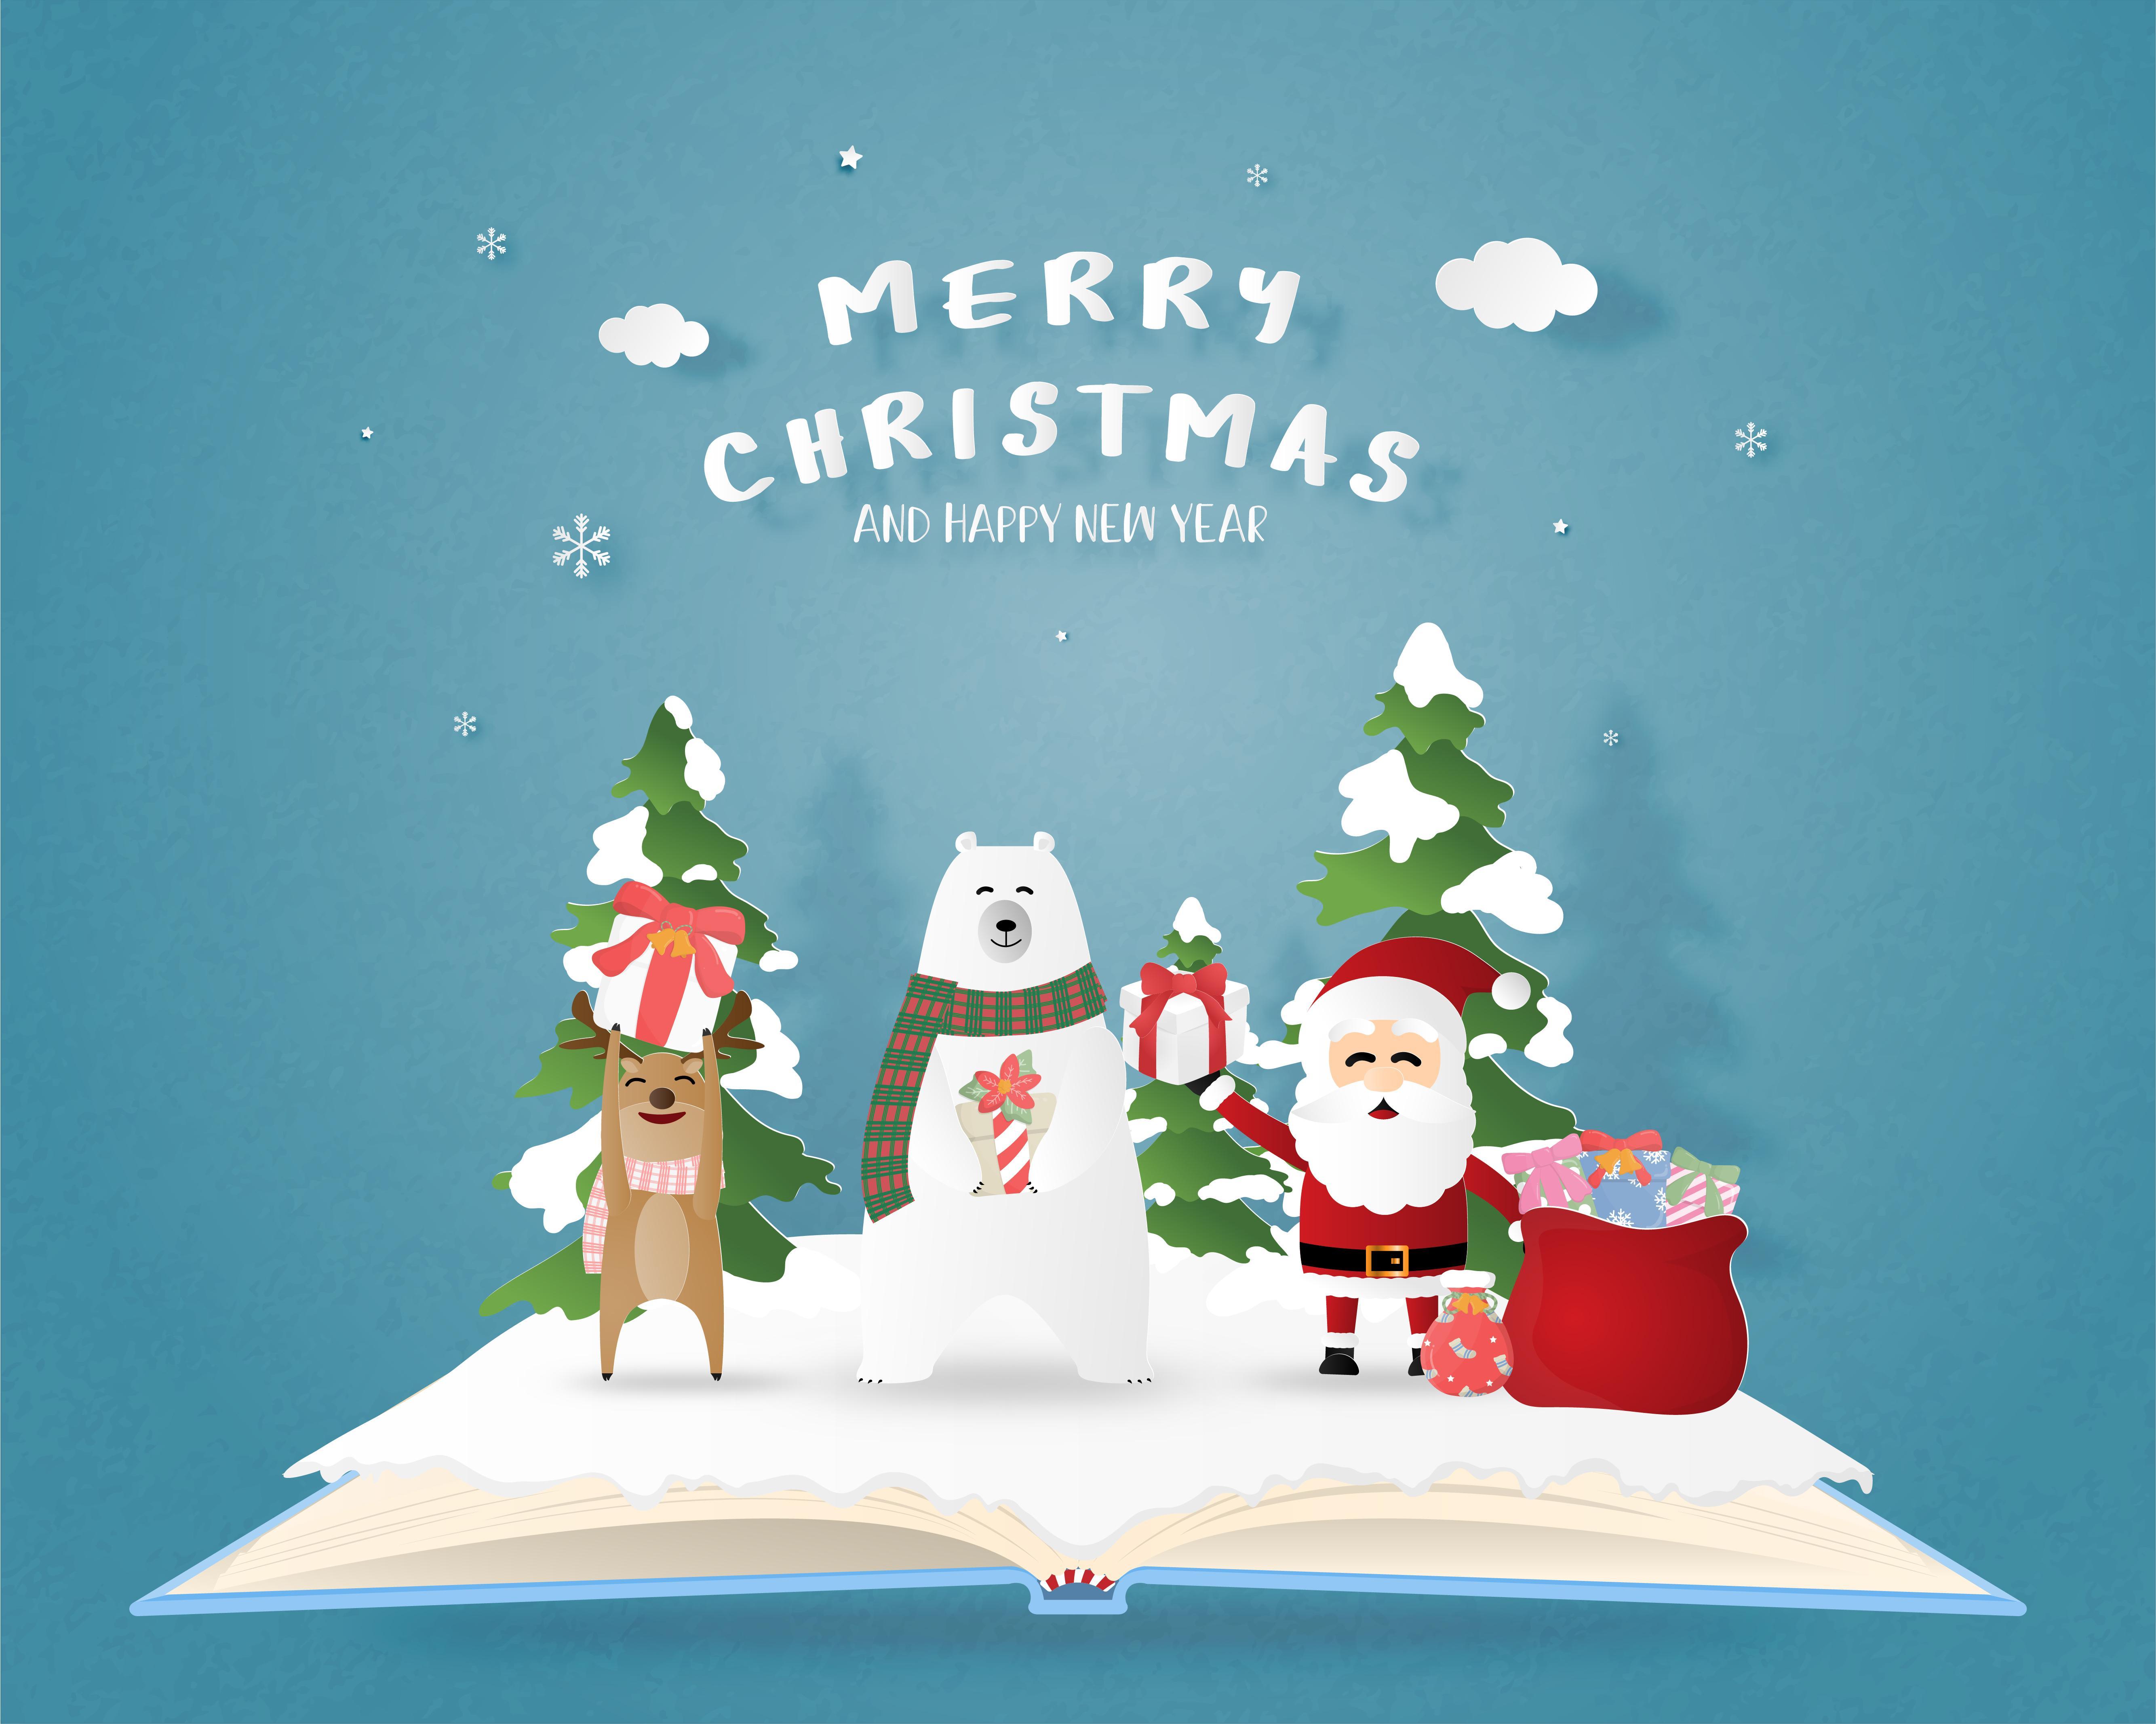 Merry Christmas and Happy new year greeting card in paper